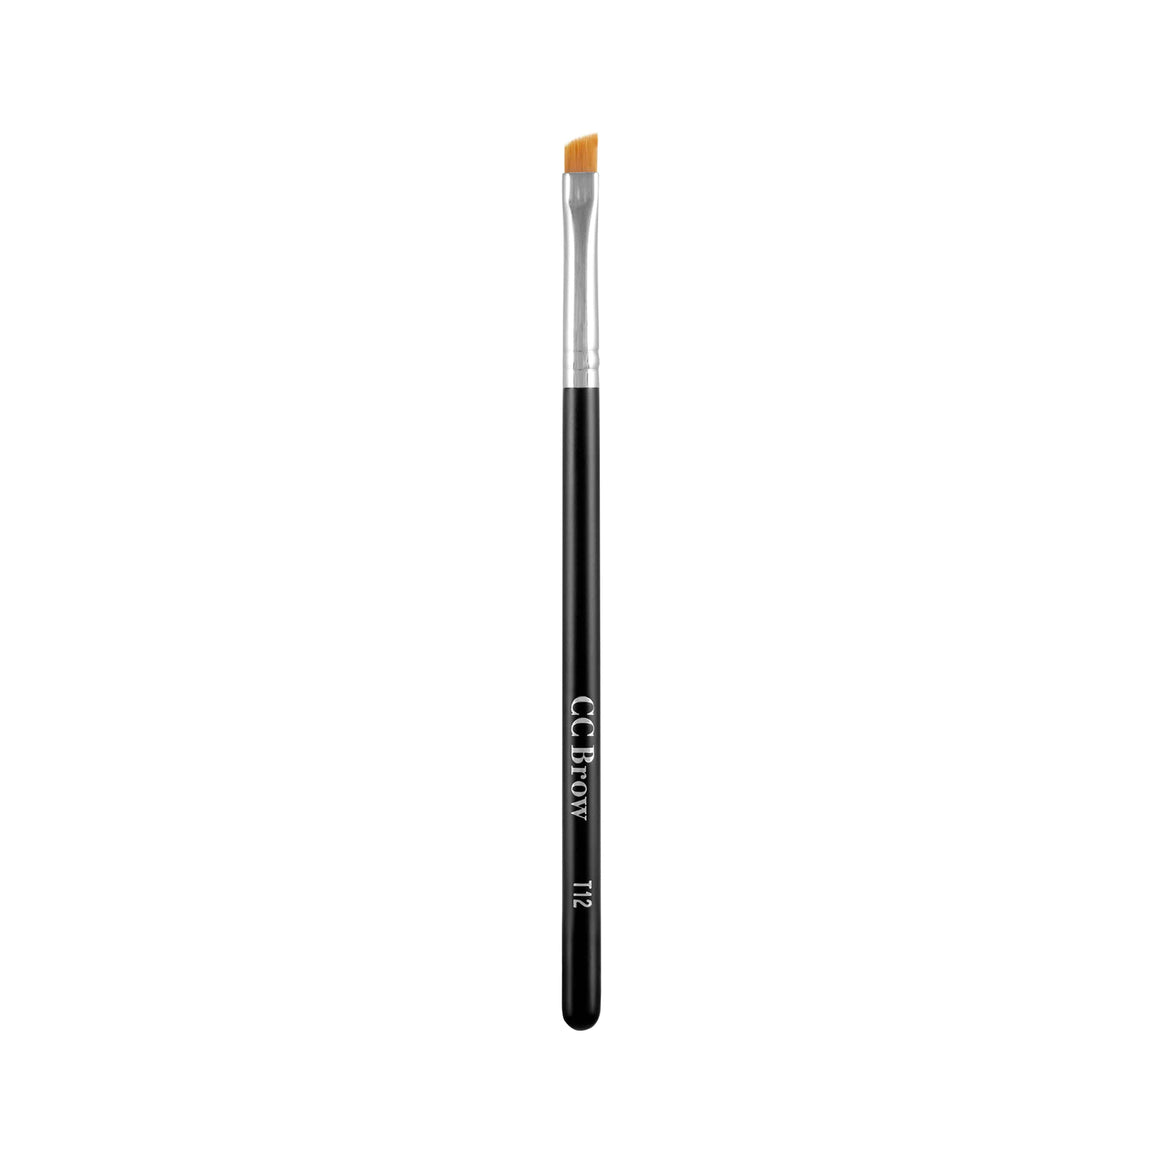 Brush for henna Т11 CC Brow - Beauty Shop Direct